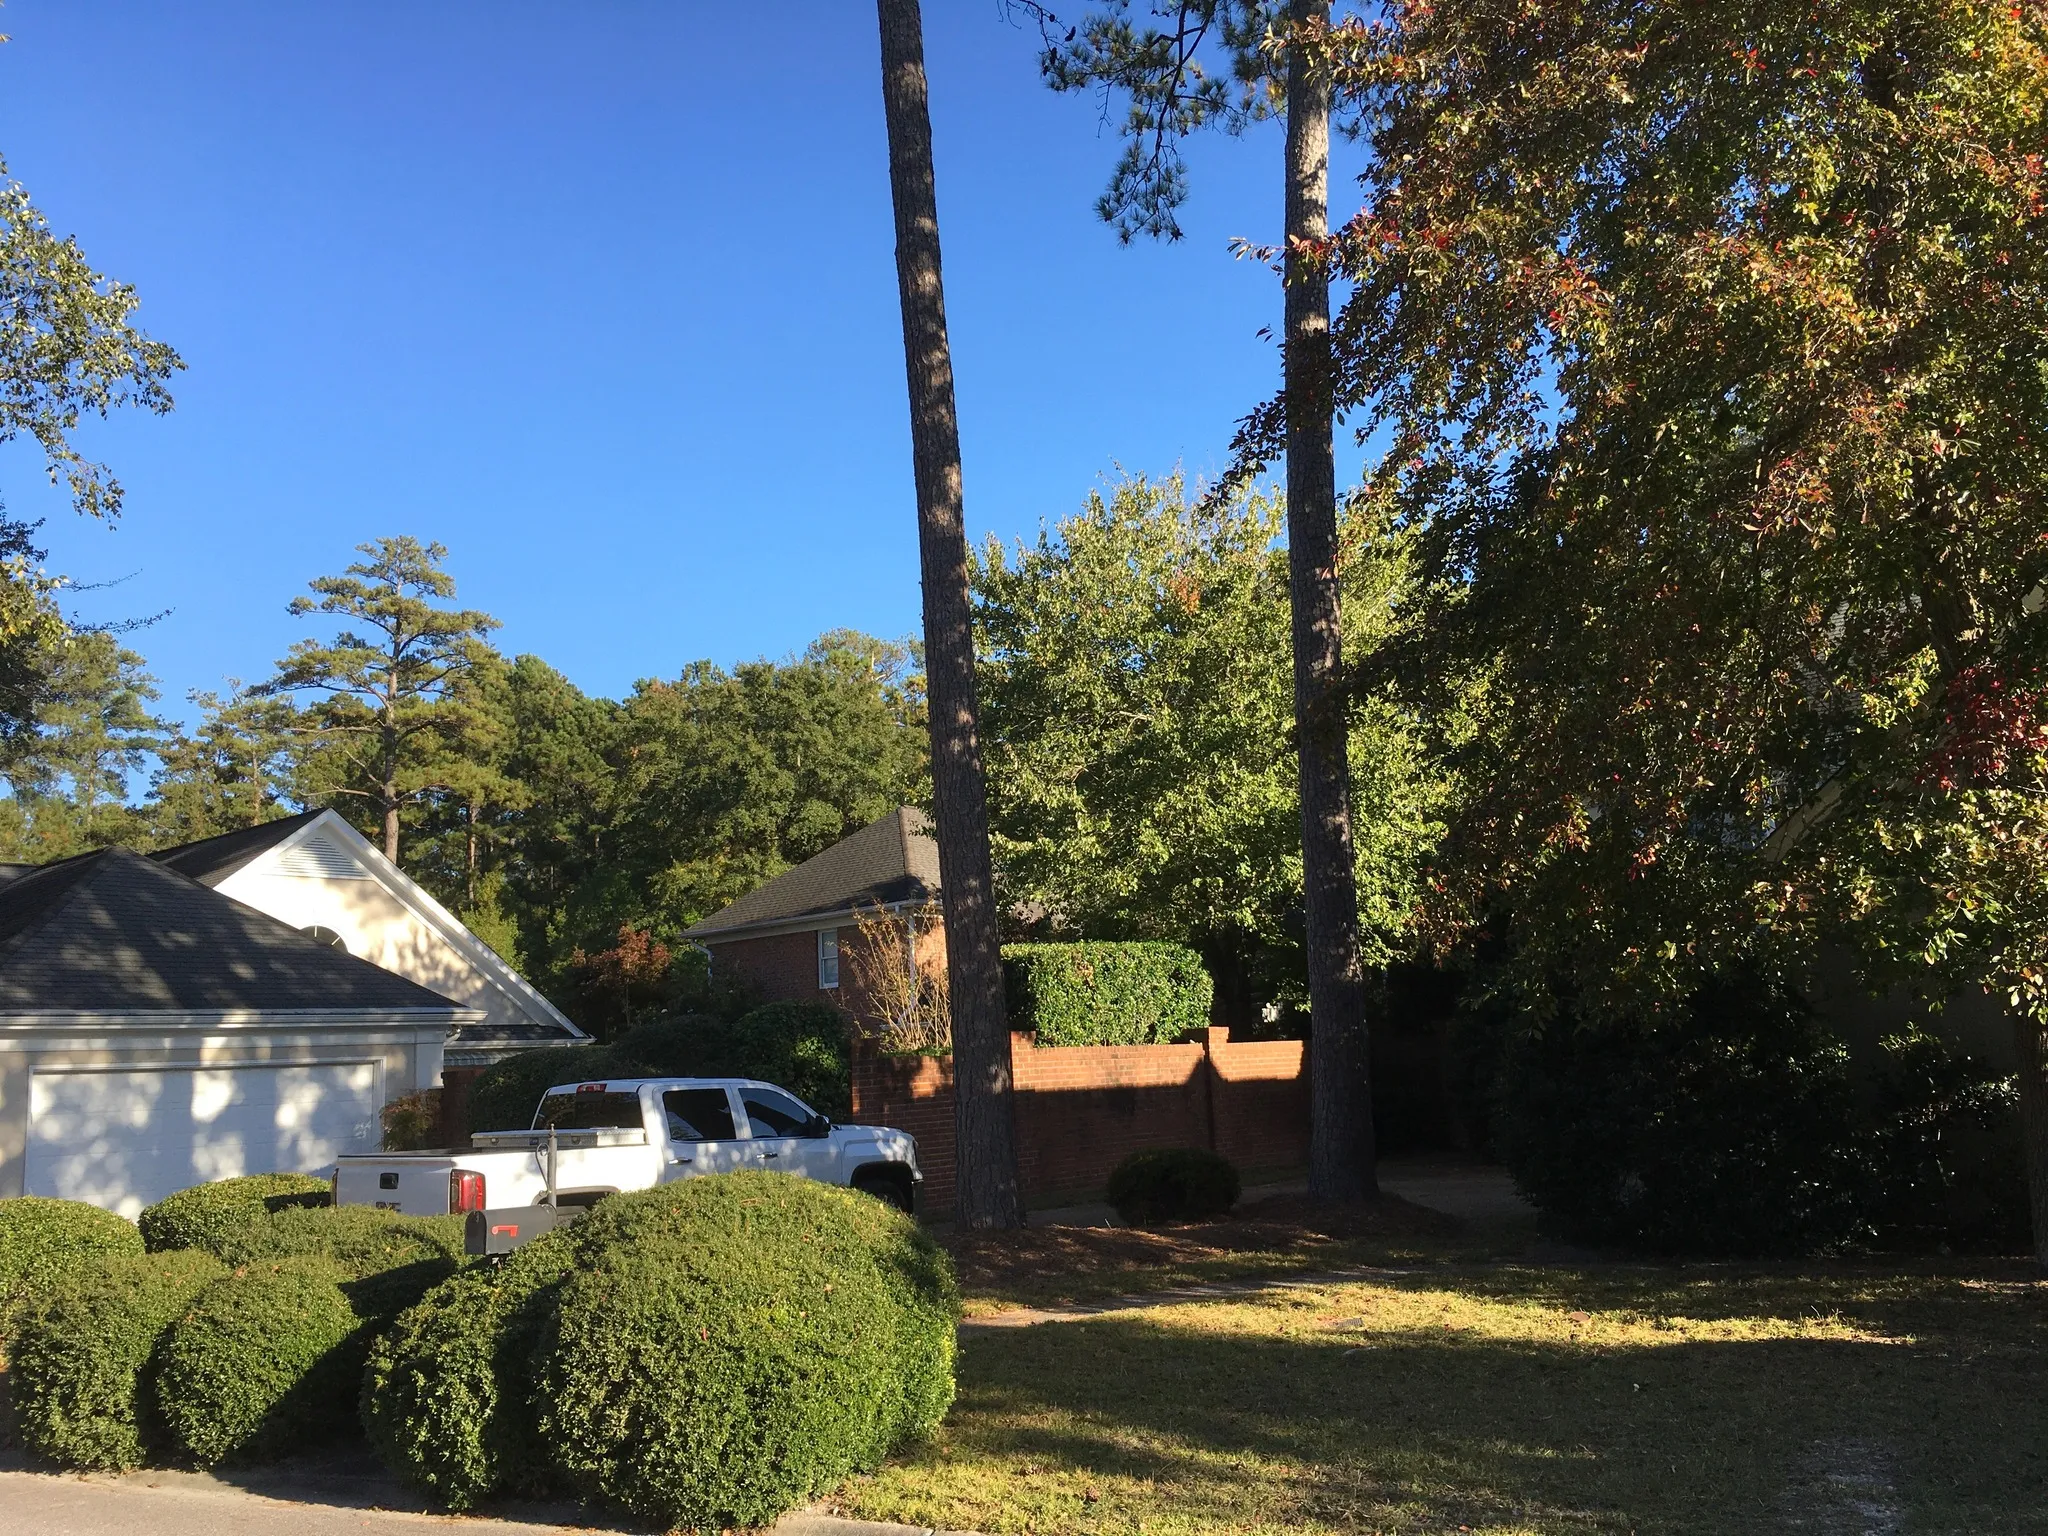 Tree Removal for Tucker's Tree Service and Stump Grinding in Lugoff, SC